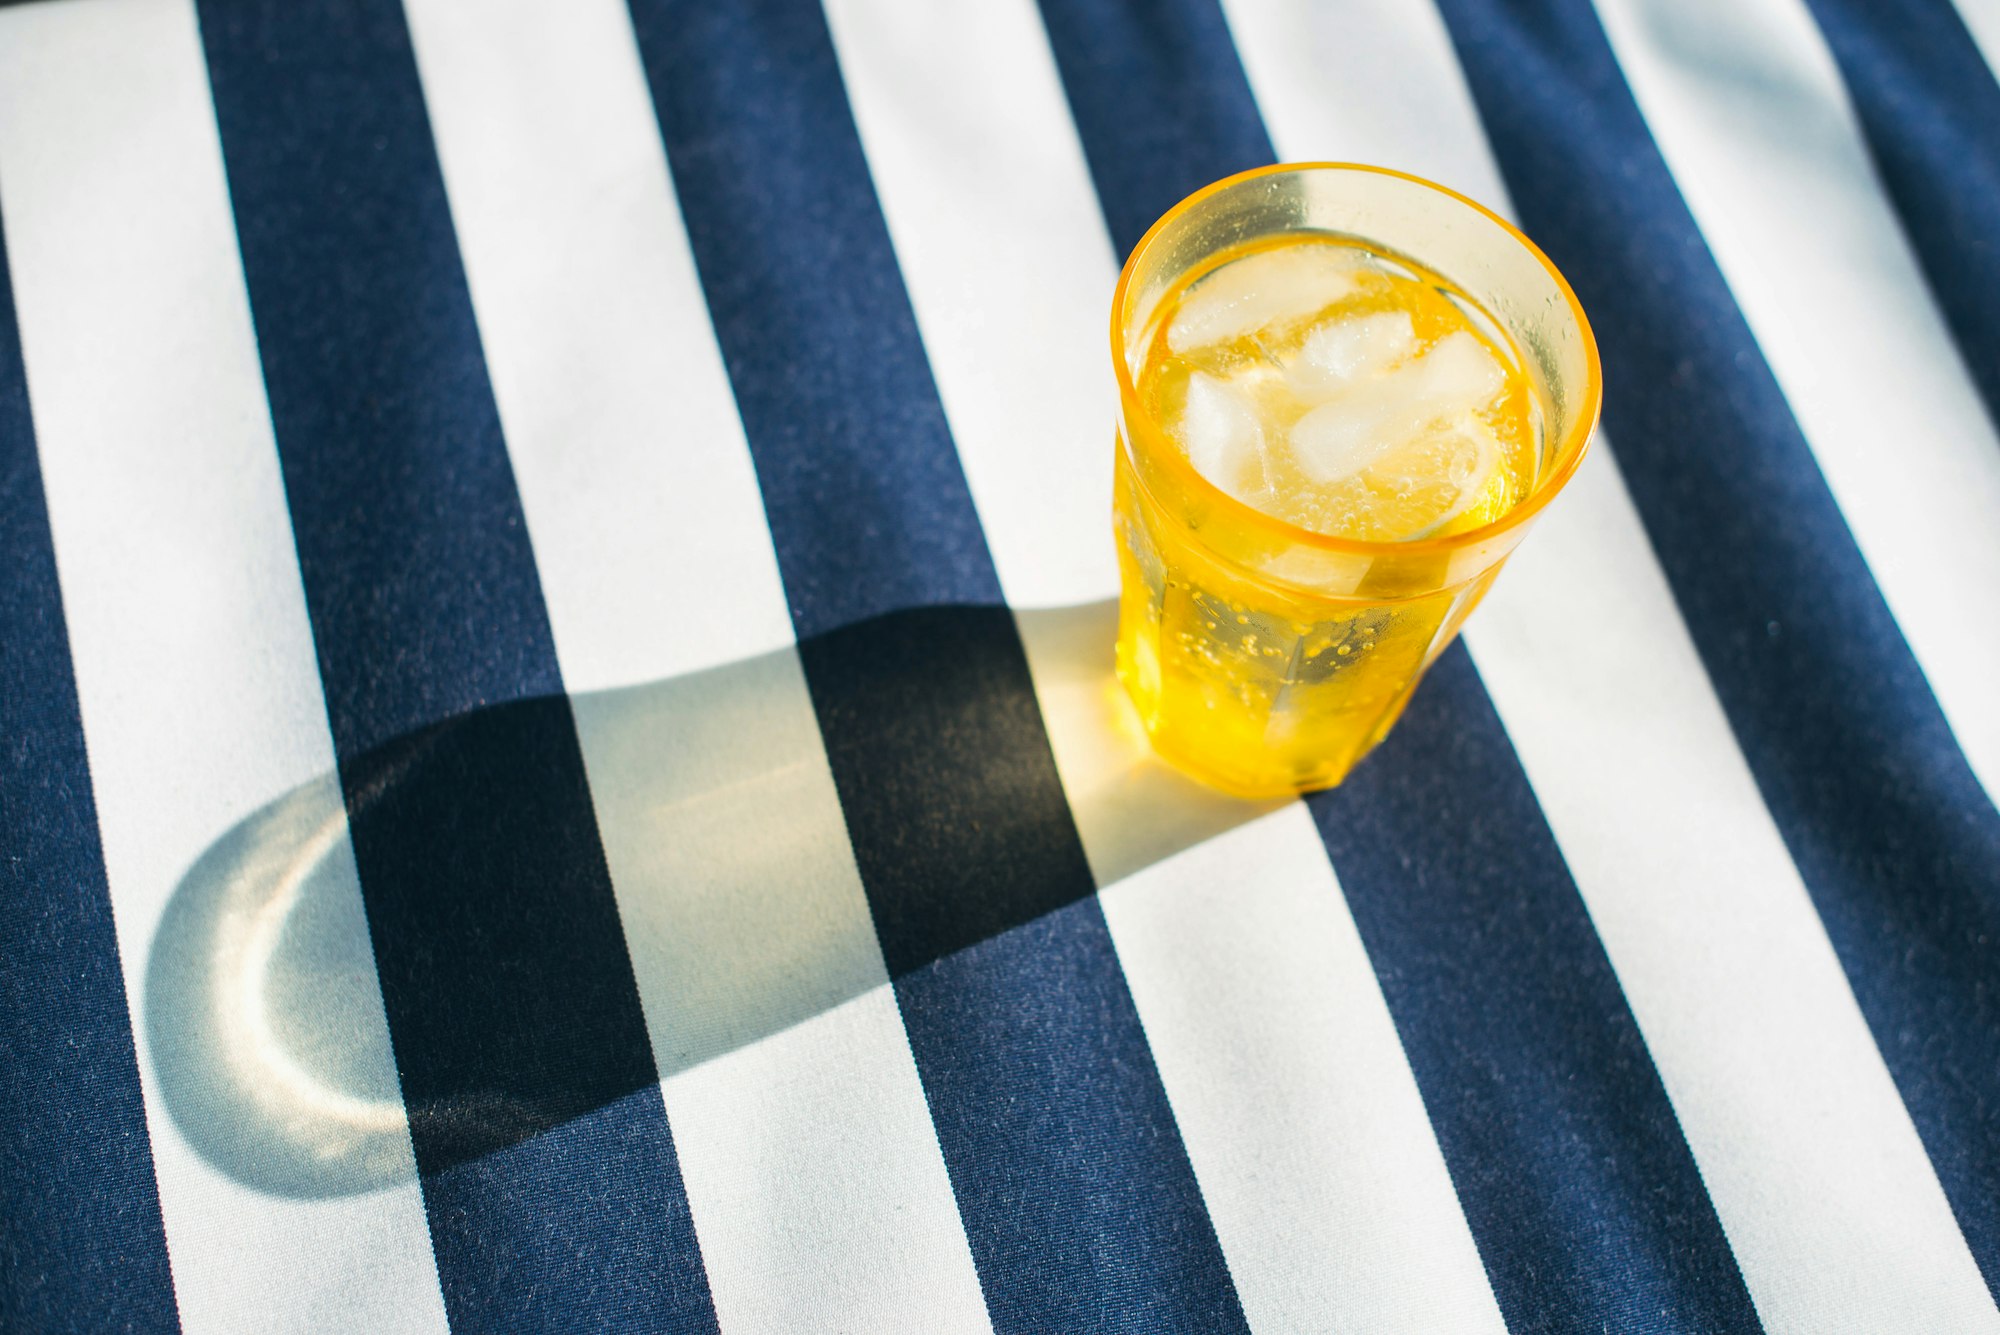 Drink in yellow cup on striped towel at nautical themed party.